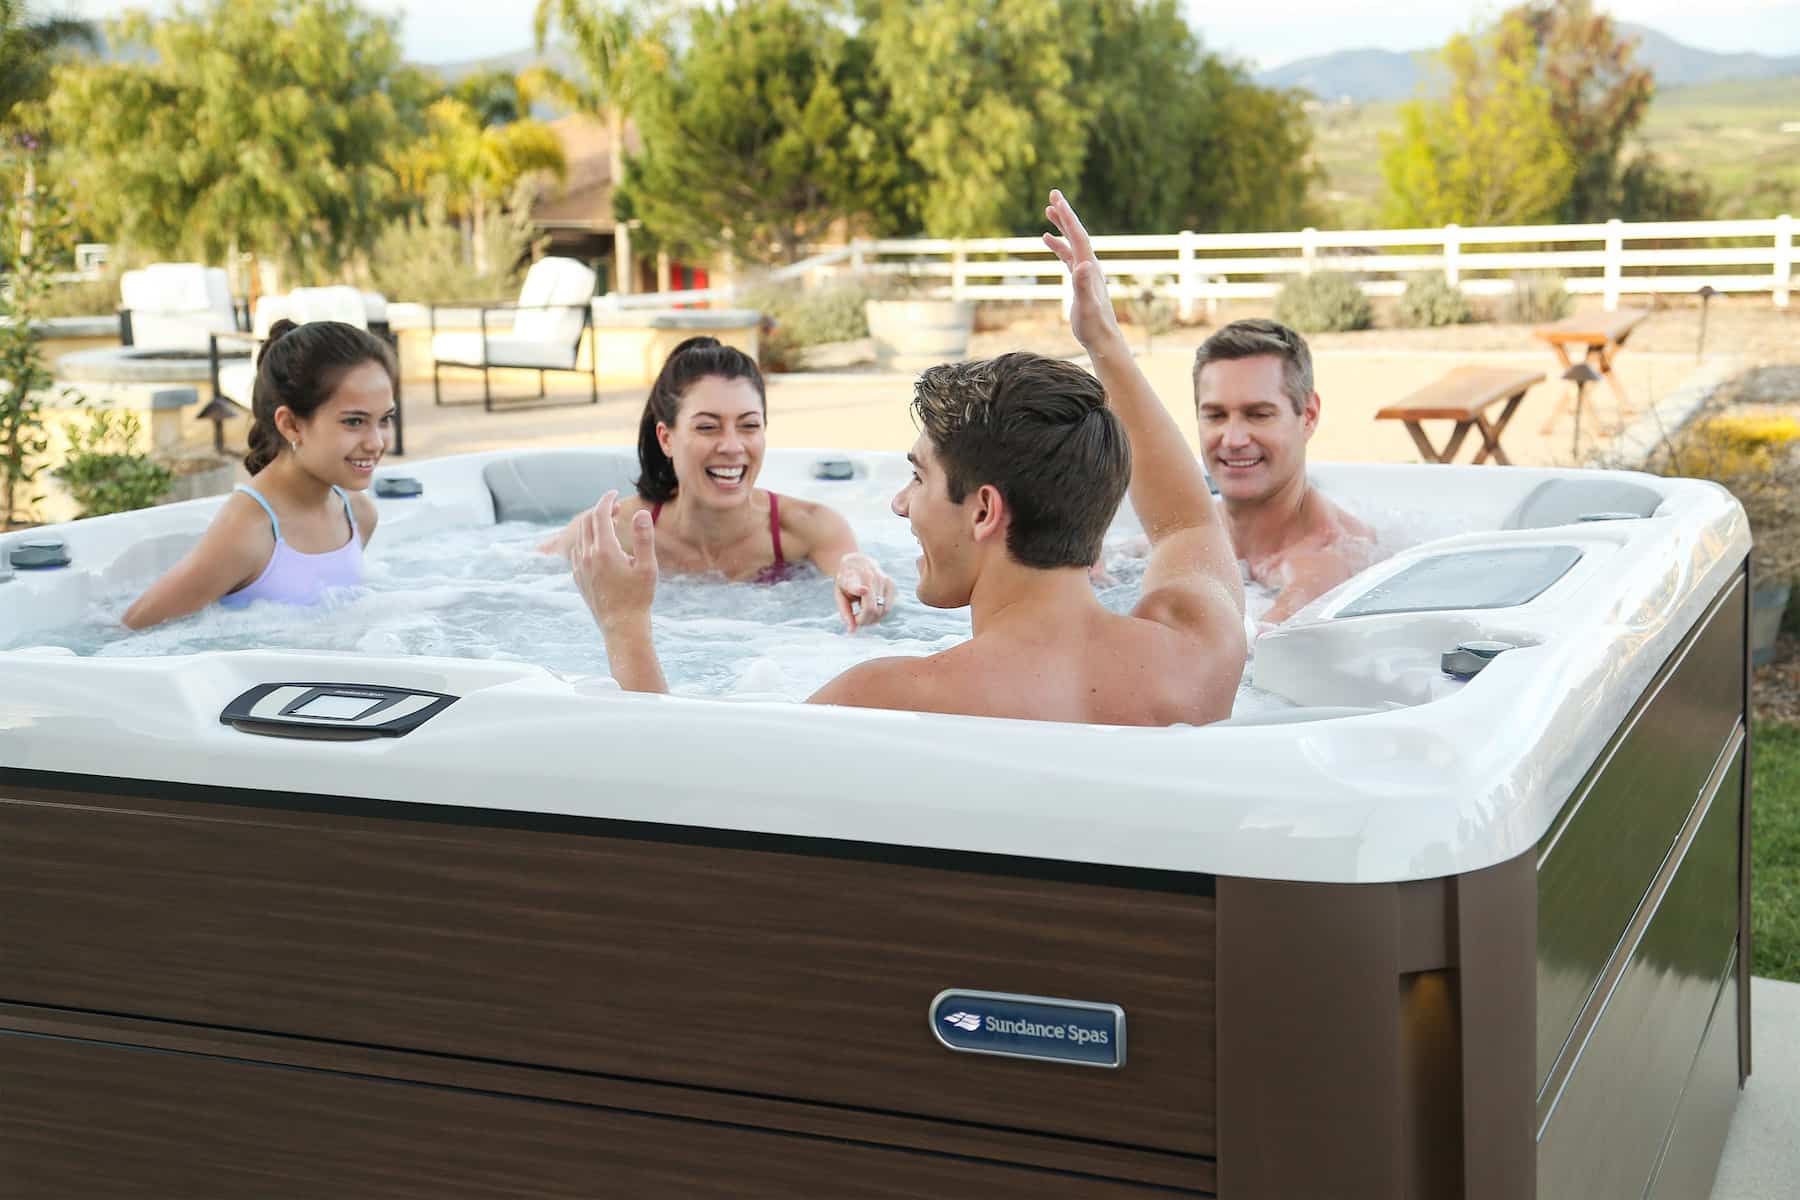 How Long Can I Stay Inside a Hot Tub For?